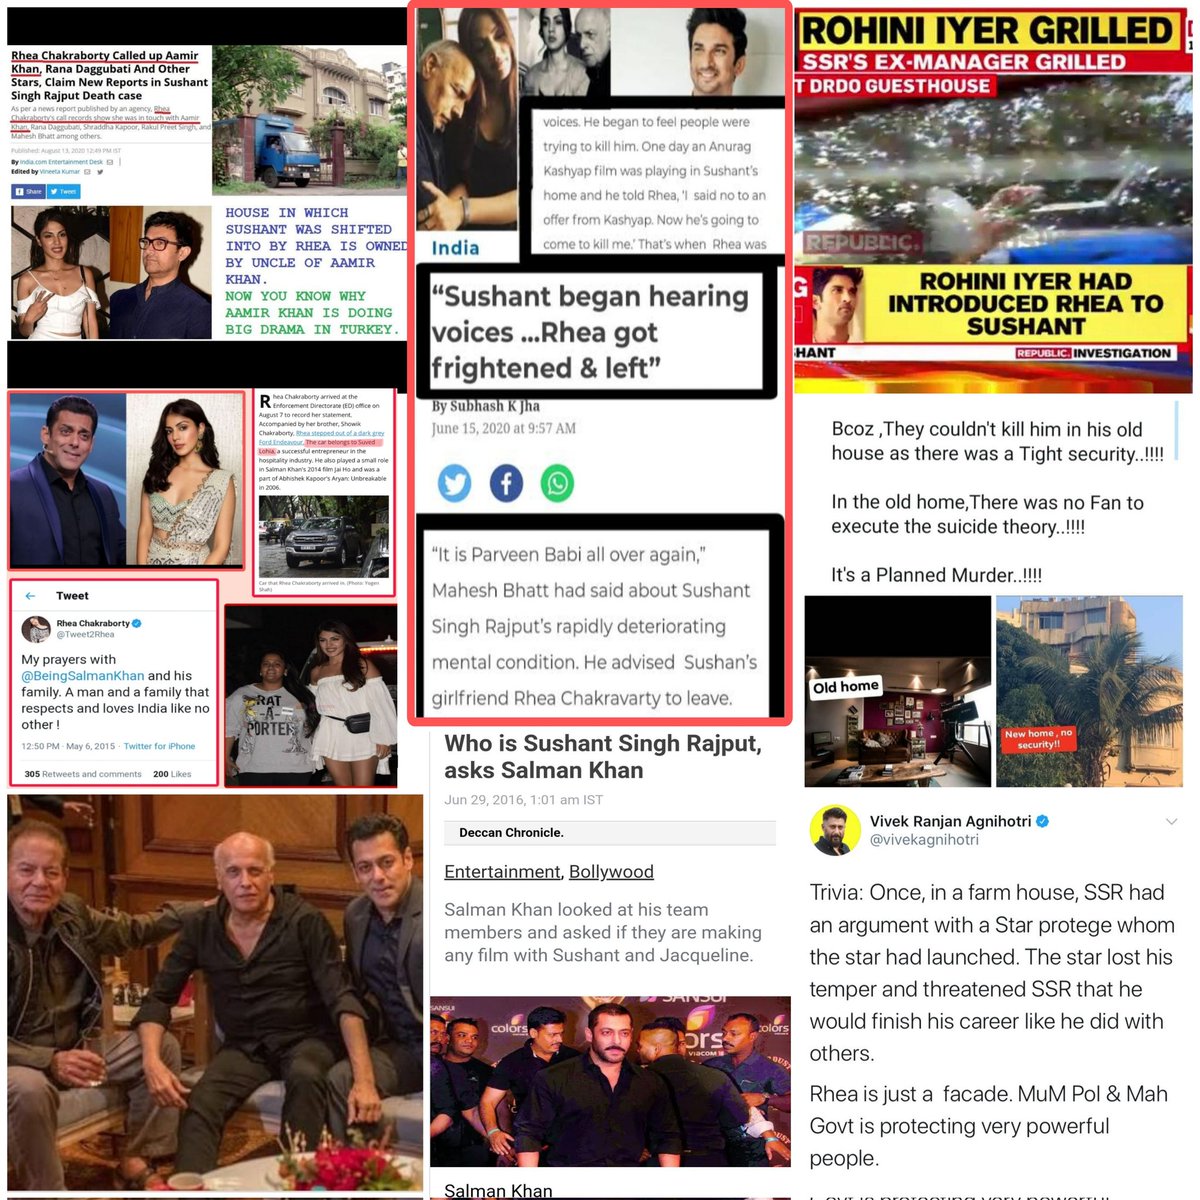 🔴SSR – Pancholi Fight 2017
Salman Threatened SSR
🔴SSR met Bhatt 2018 (Rejected Sadak2)
🔴Rhea met SSR 2019 (via Rohini Iyer)
🔴Rhea/SSR moved in Dec'19 at MB
🔴Flat owned by Uncle of Aamir Khan
🔴Aft June14, Rhea spotted with Akhtars.

➡️all linked!

SSR Eliminated By Syndicate